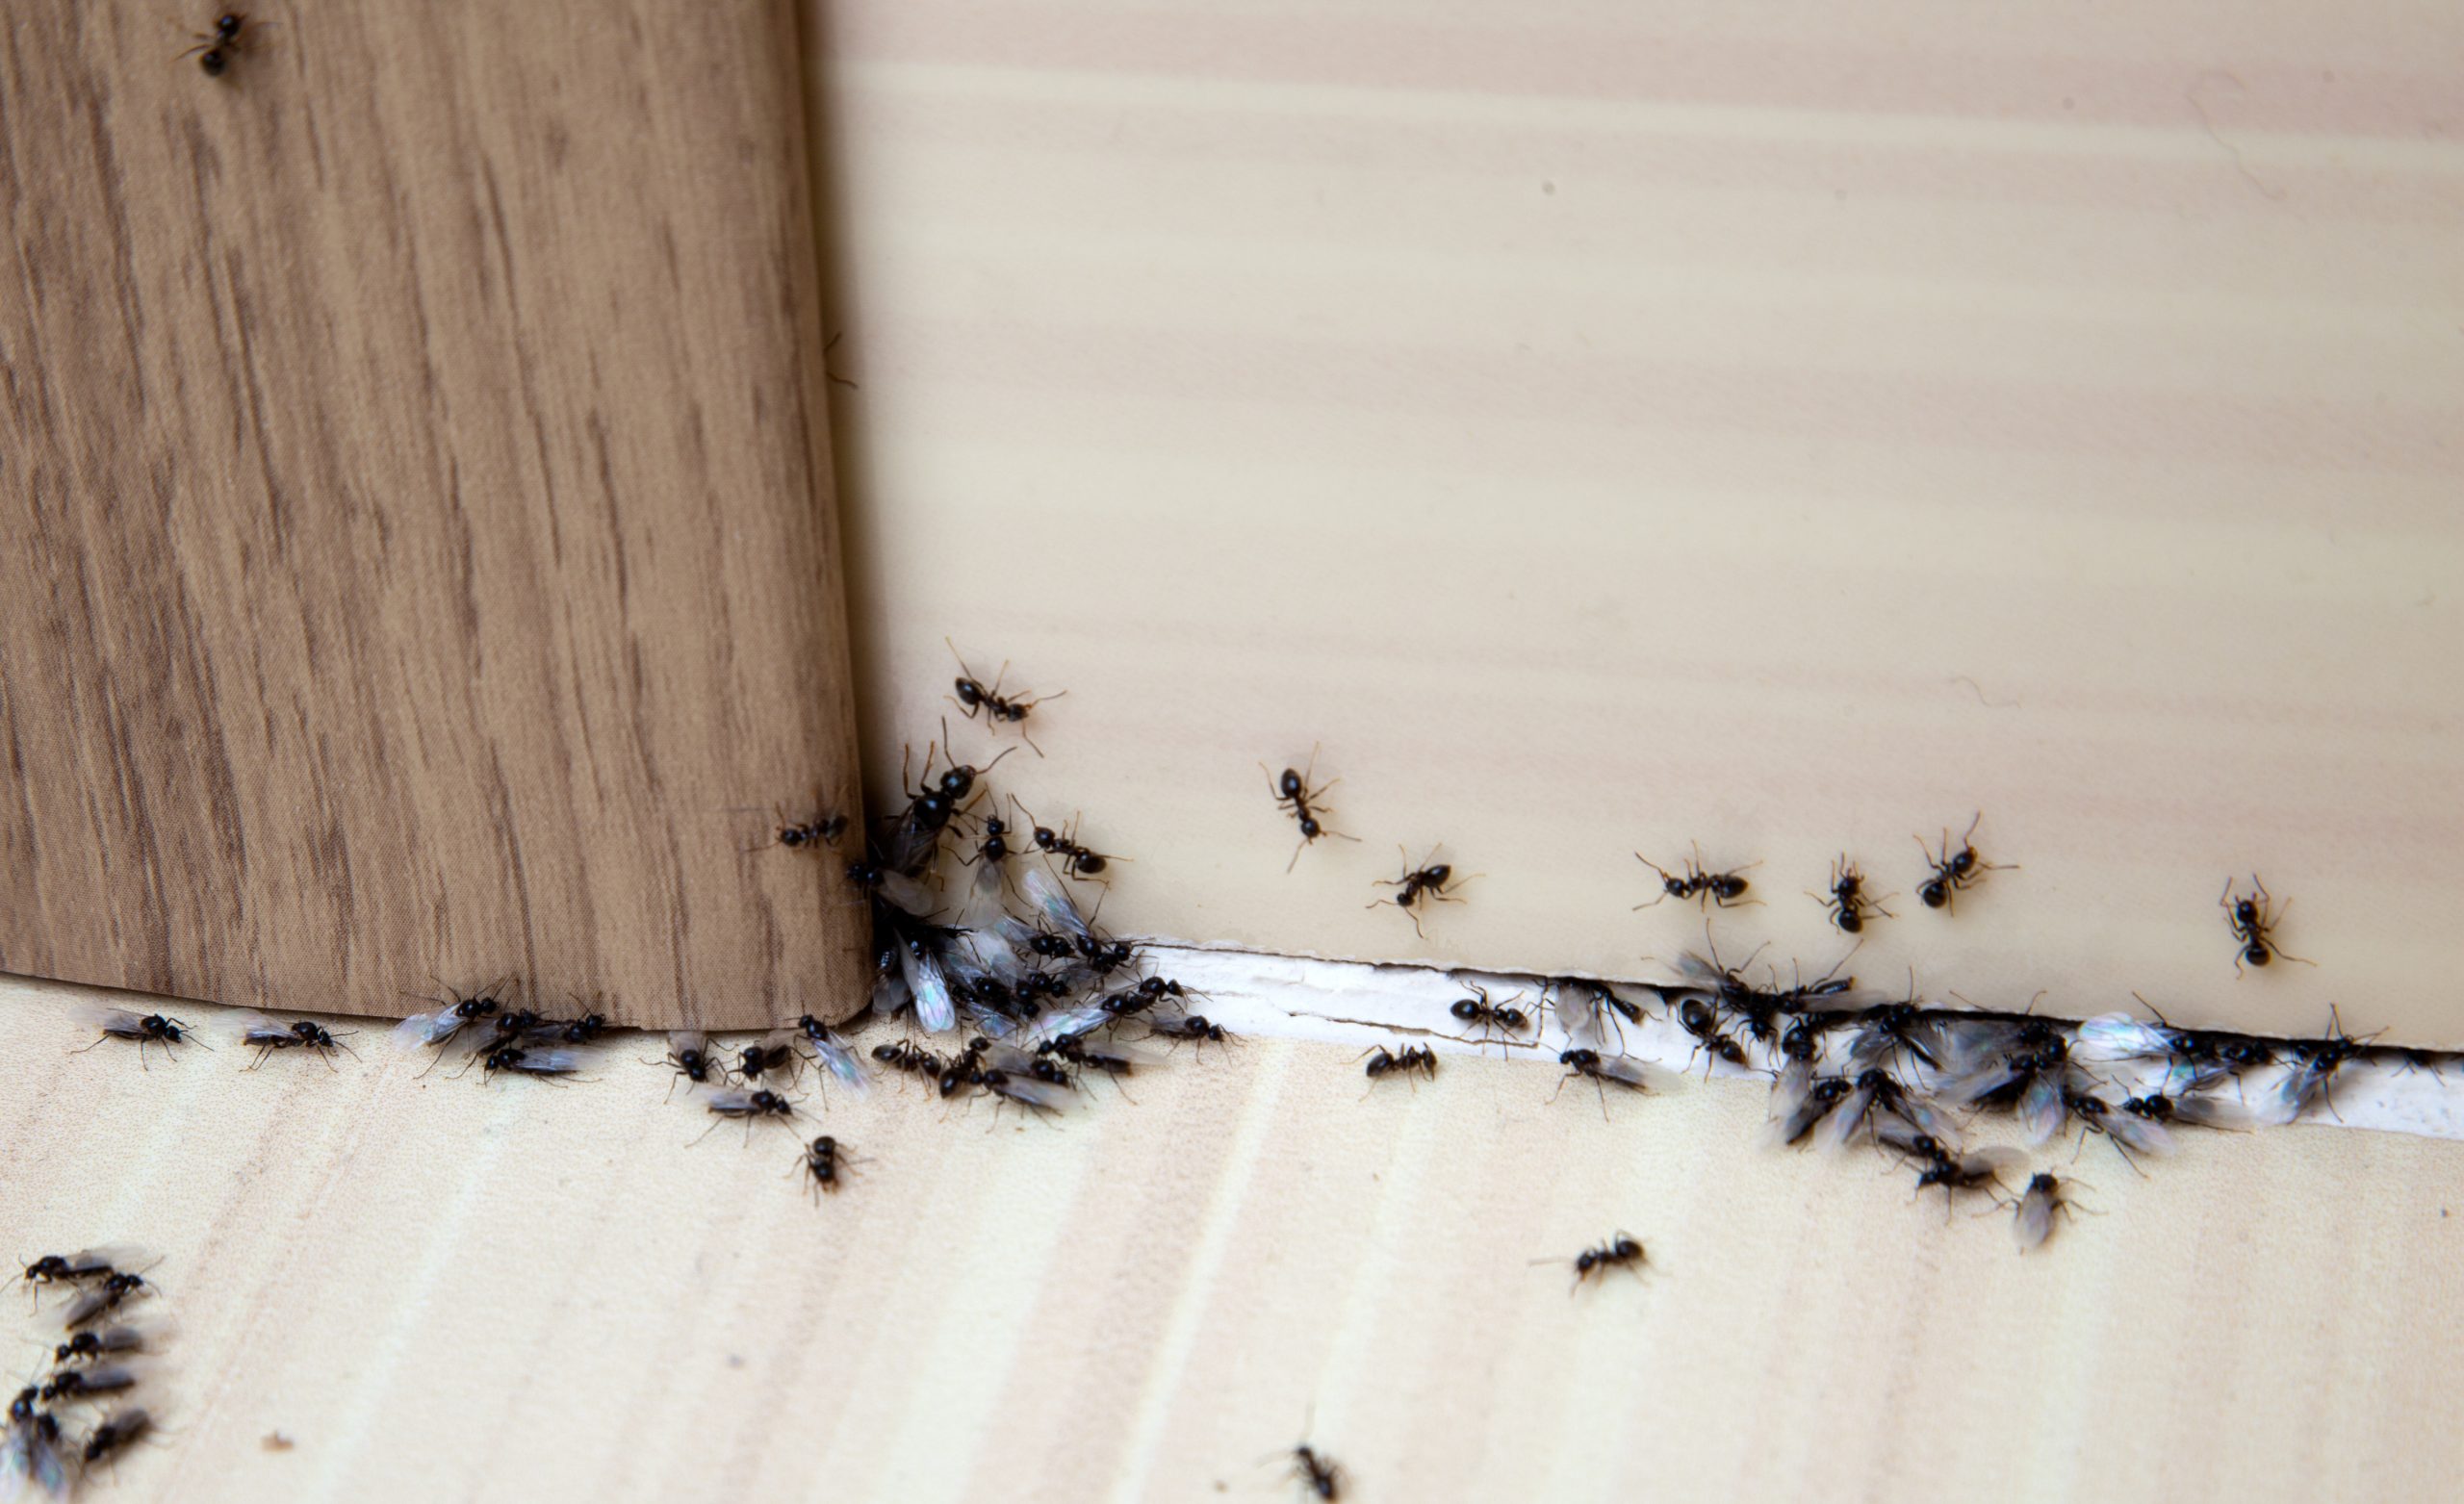 My $1.33 hack instantly removes ants from your kitchen – it makes your space smell great and uses a single ingredient